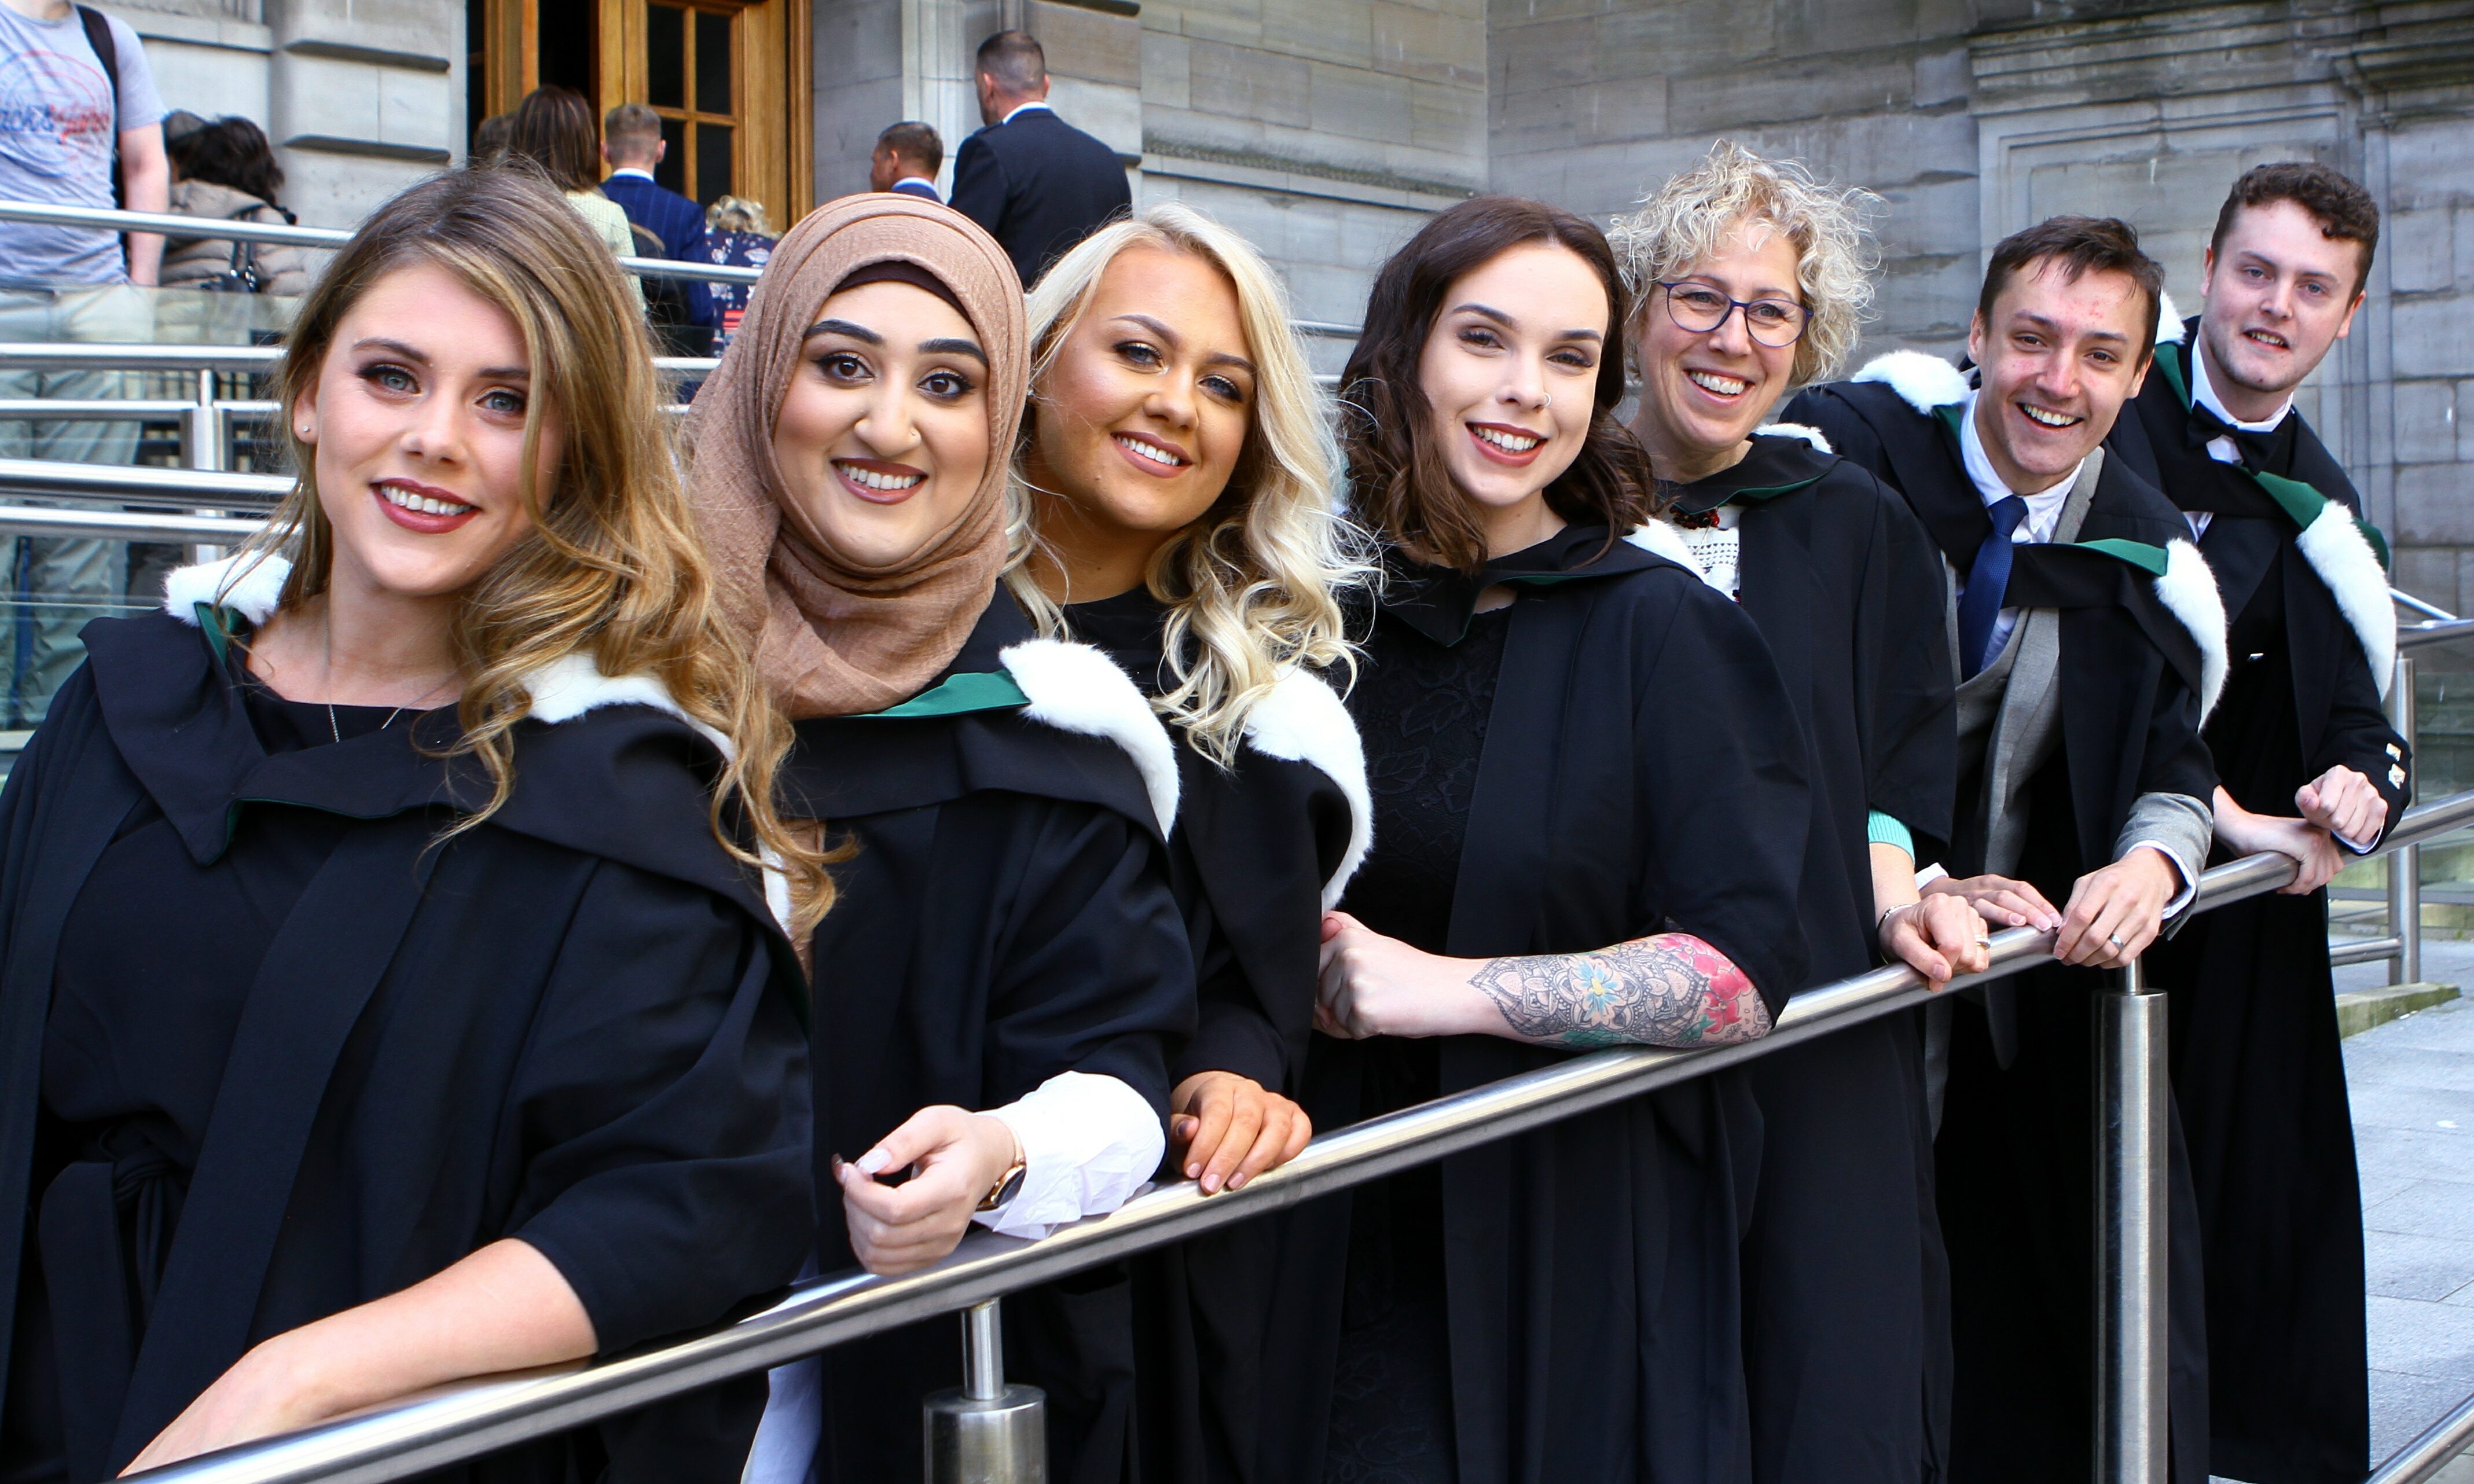 Social Work graduates, L/R, Nicole Marra, Anisah Ali, Claire Trevis, Bethany Gibson, Audrey Mitchell, Lewis Cameron and Dan McArthur.